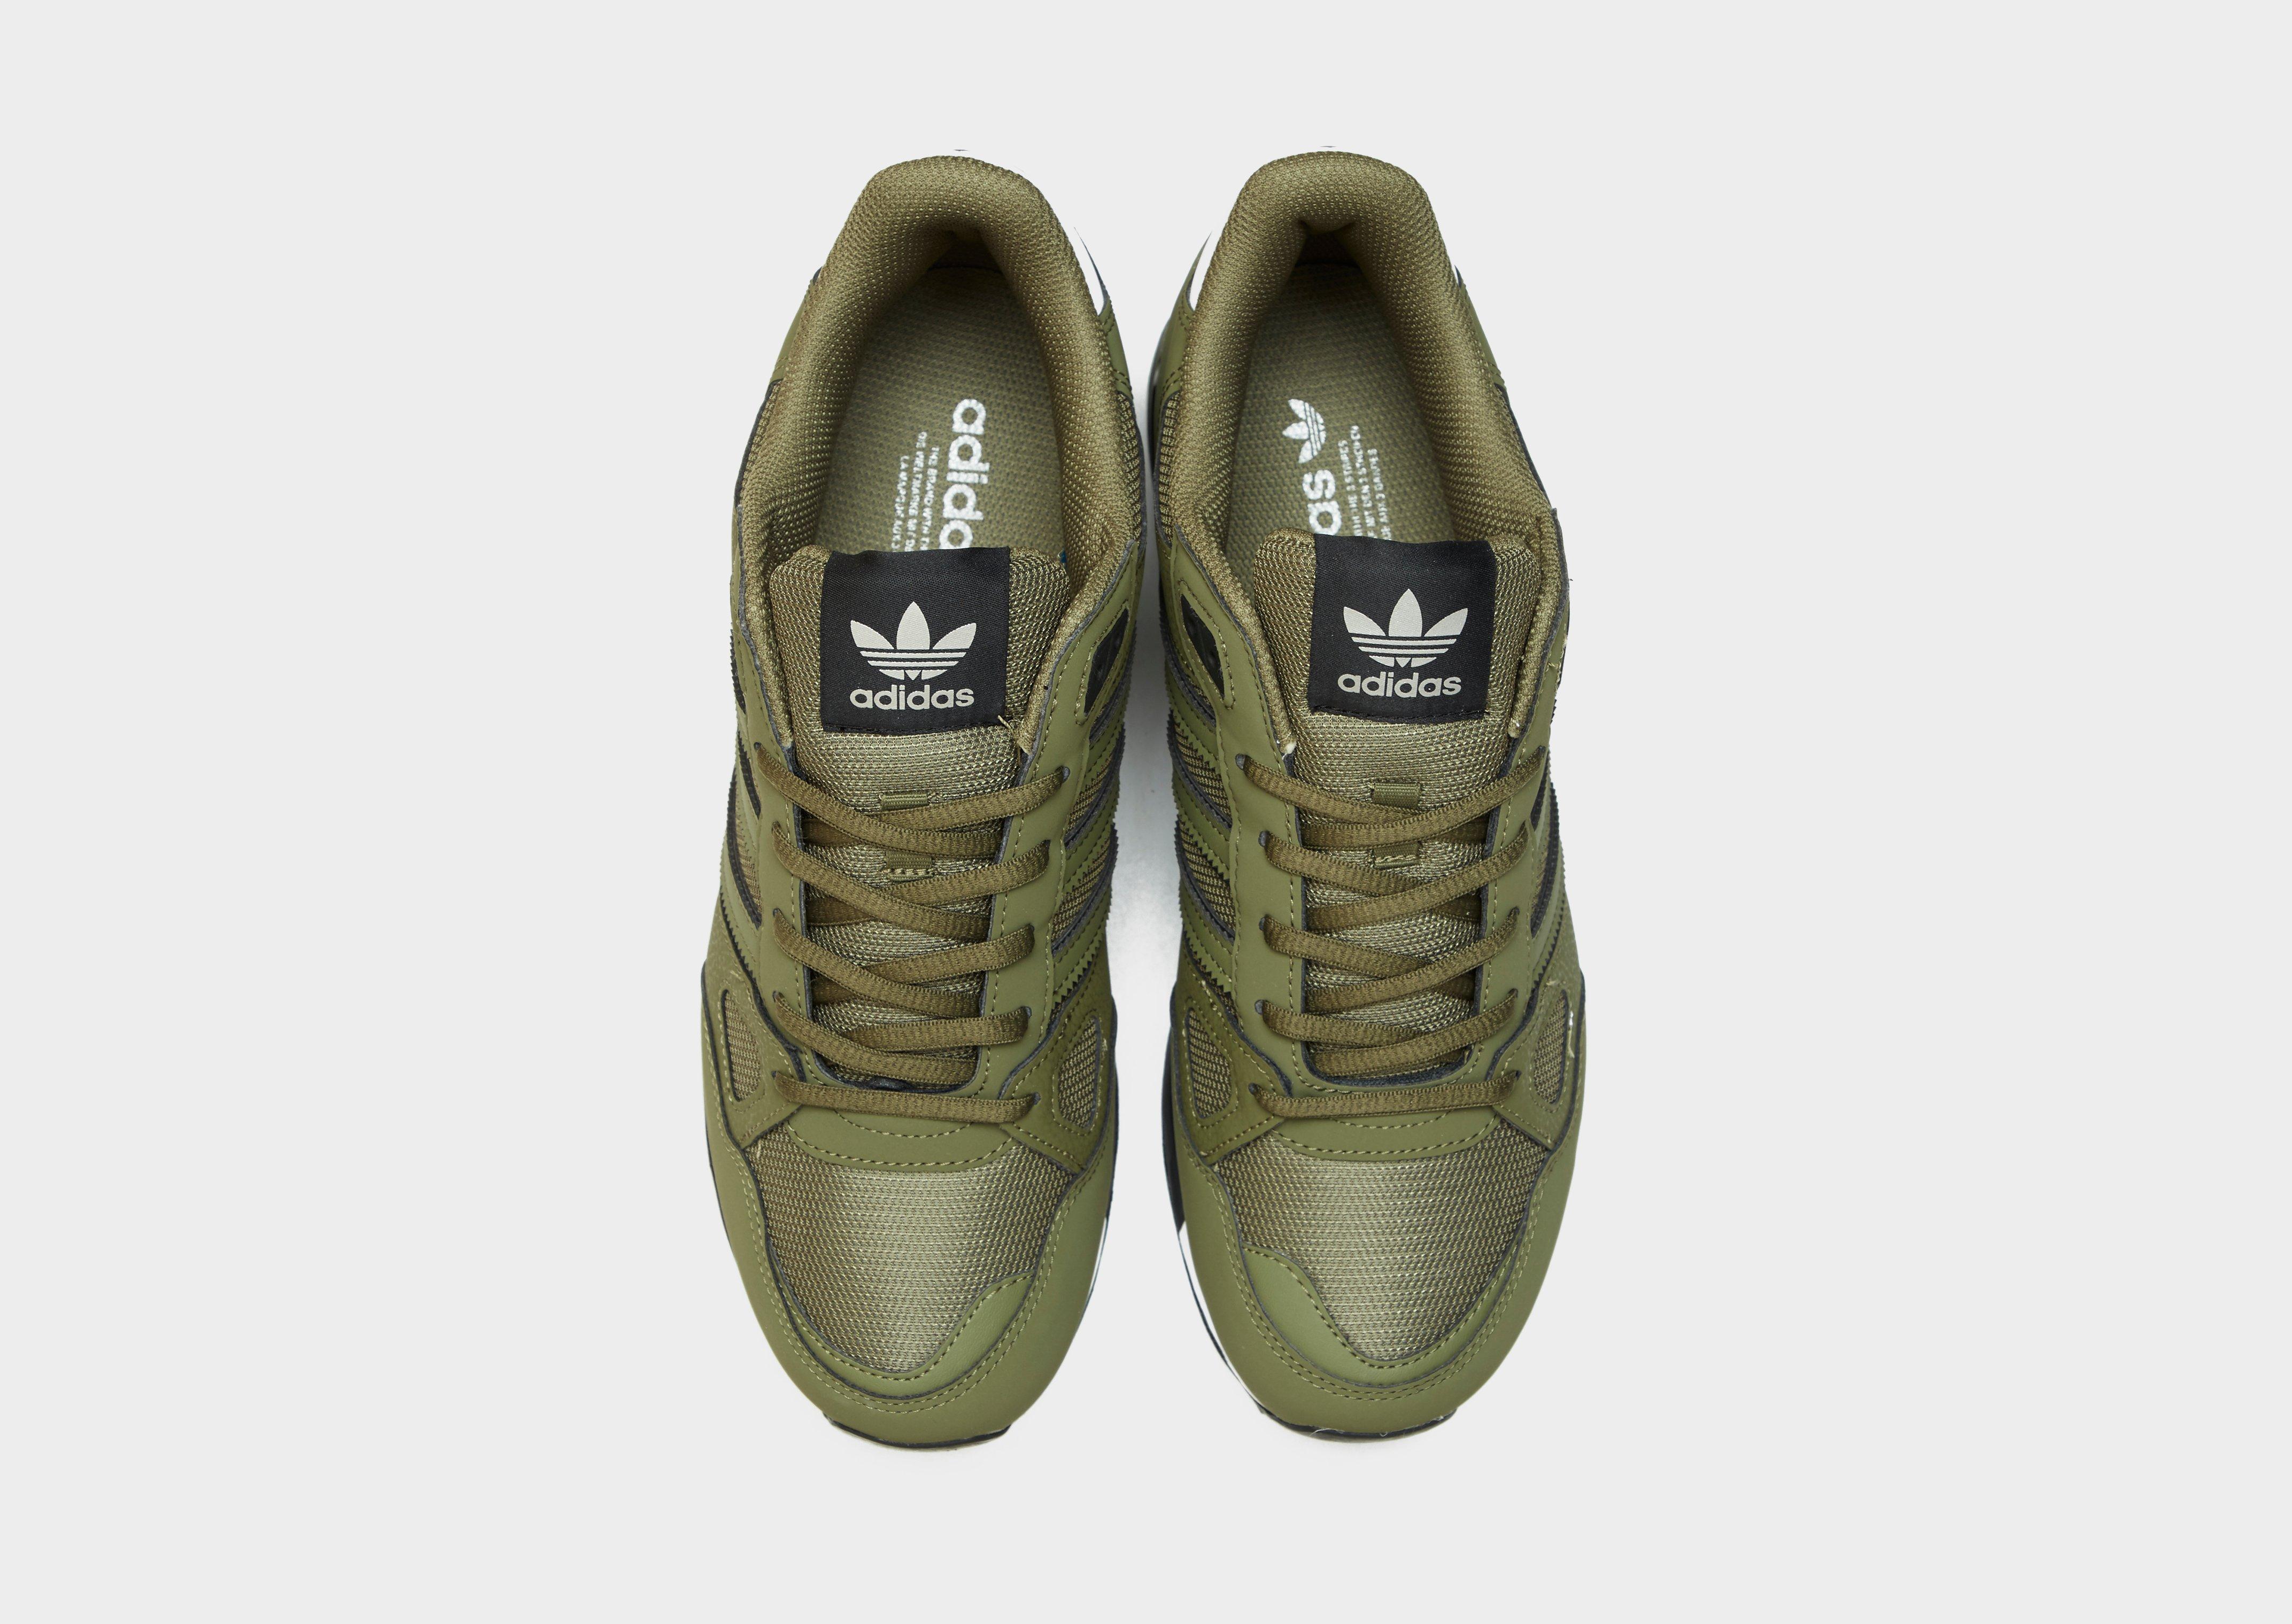 adidas zx 750 trainers black-green-yellow-red